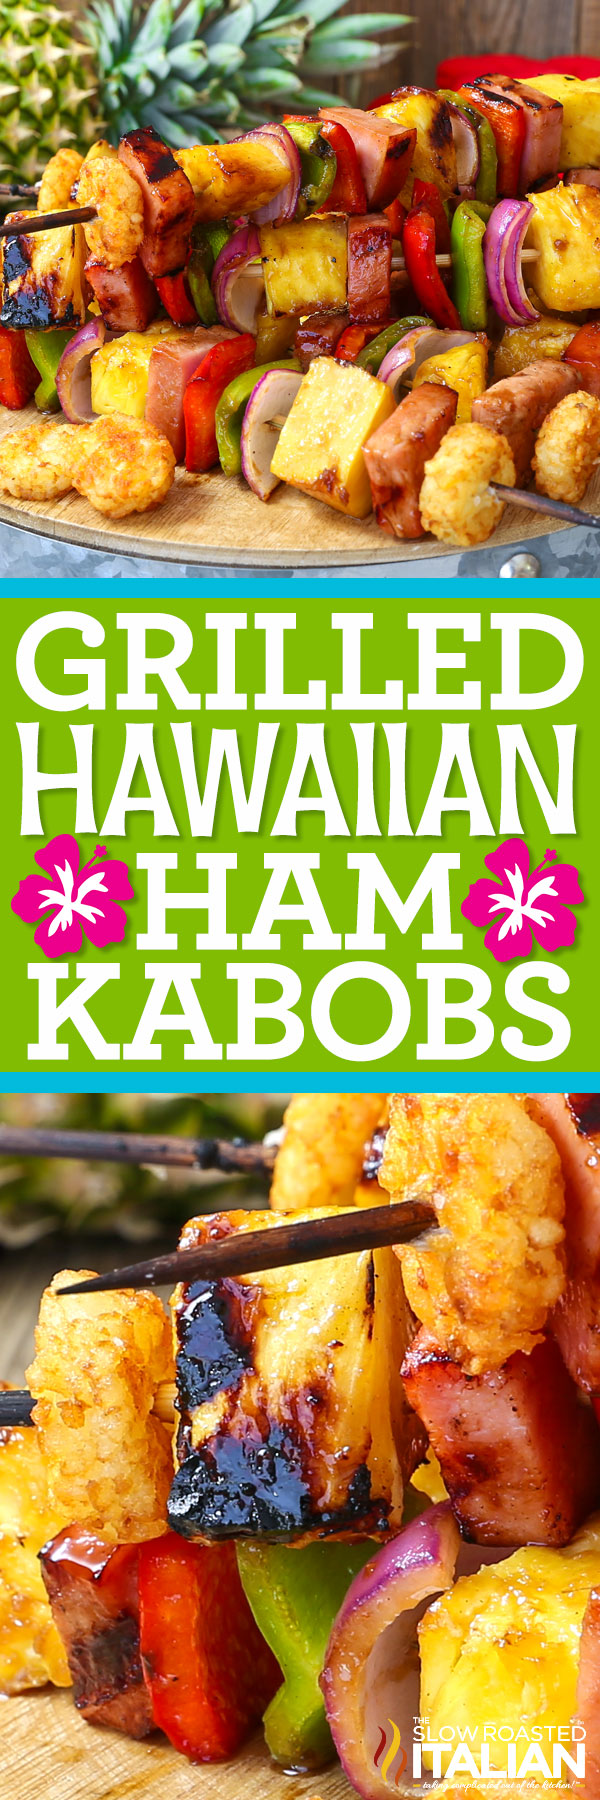 titled image (and shown): Grilled Hawaiian Ham Kabobs